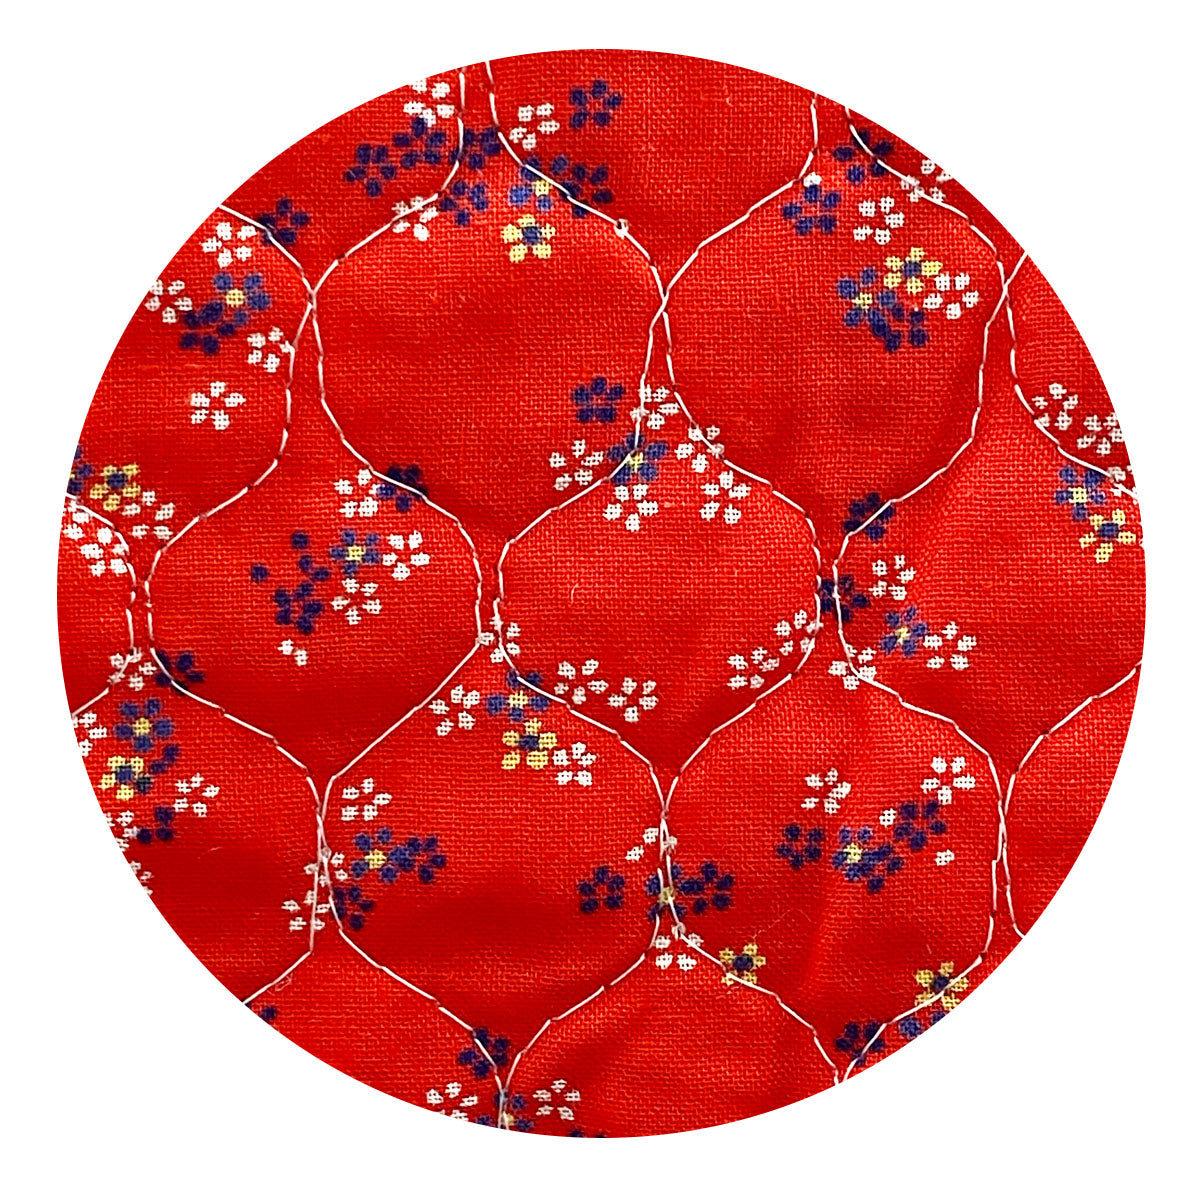 200cms Quilted Cotton Red Floral Fabric VINTAGE Sewing